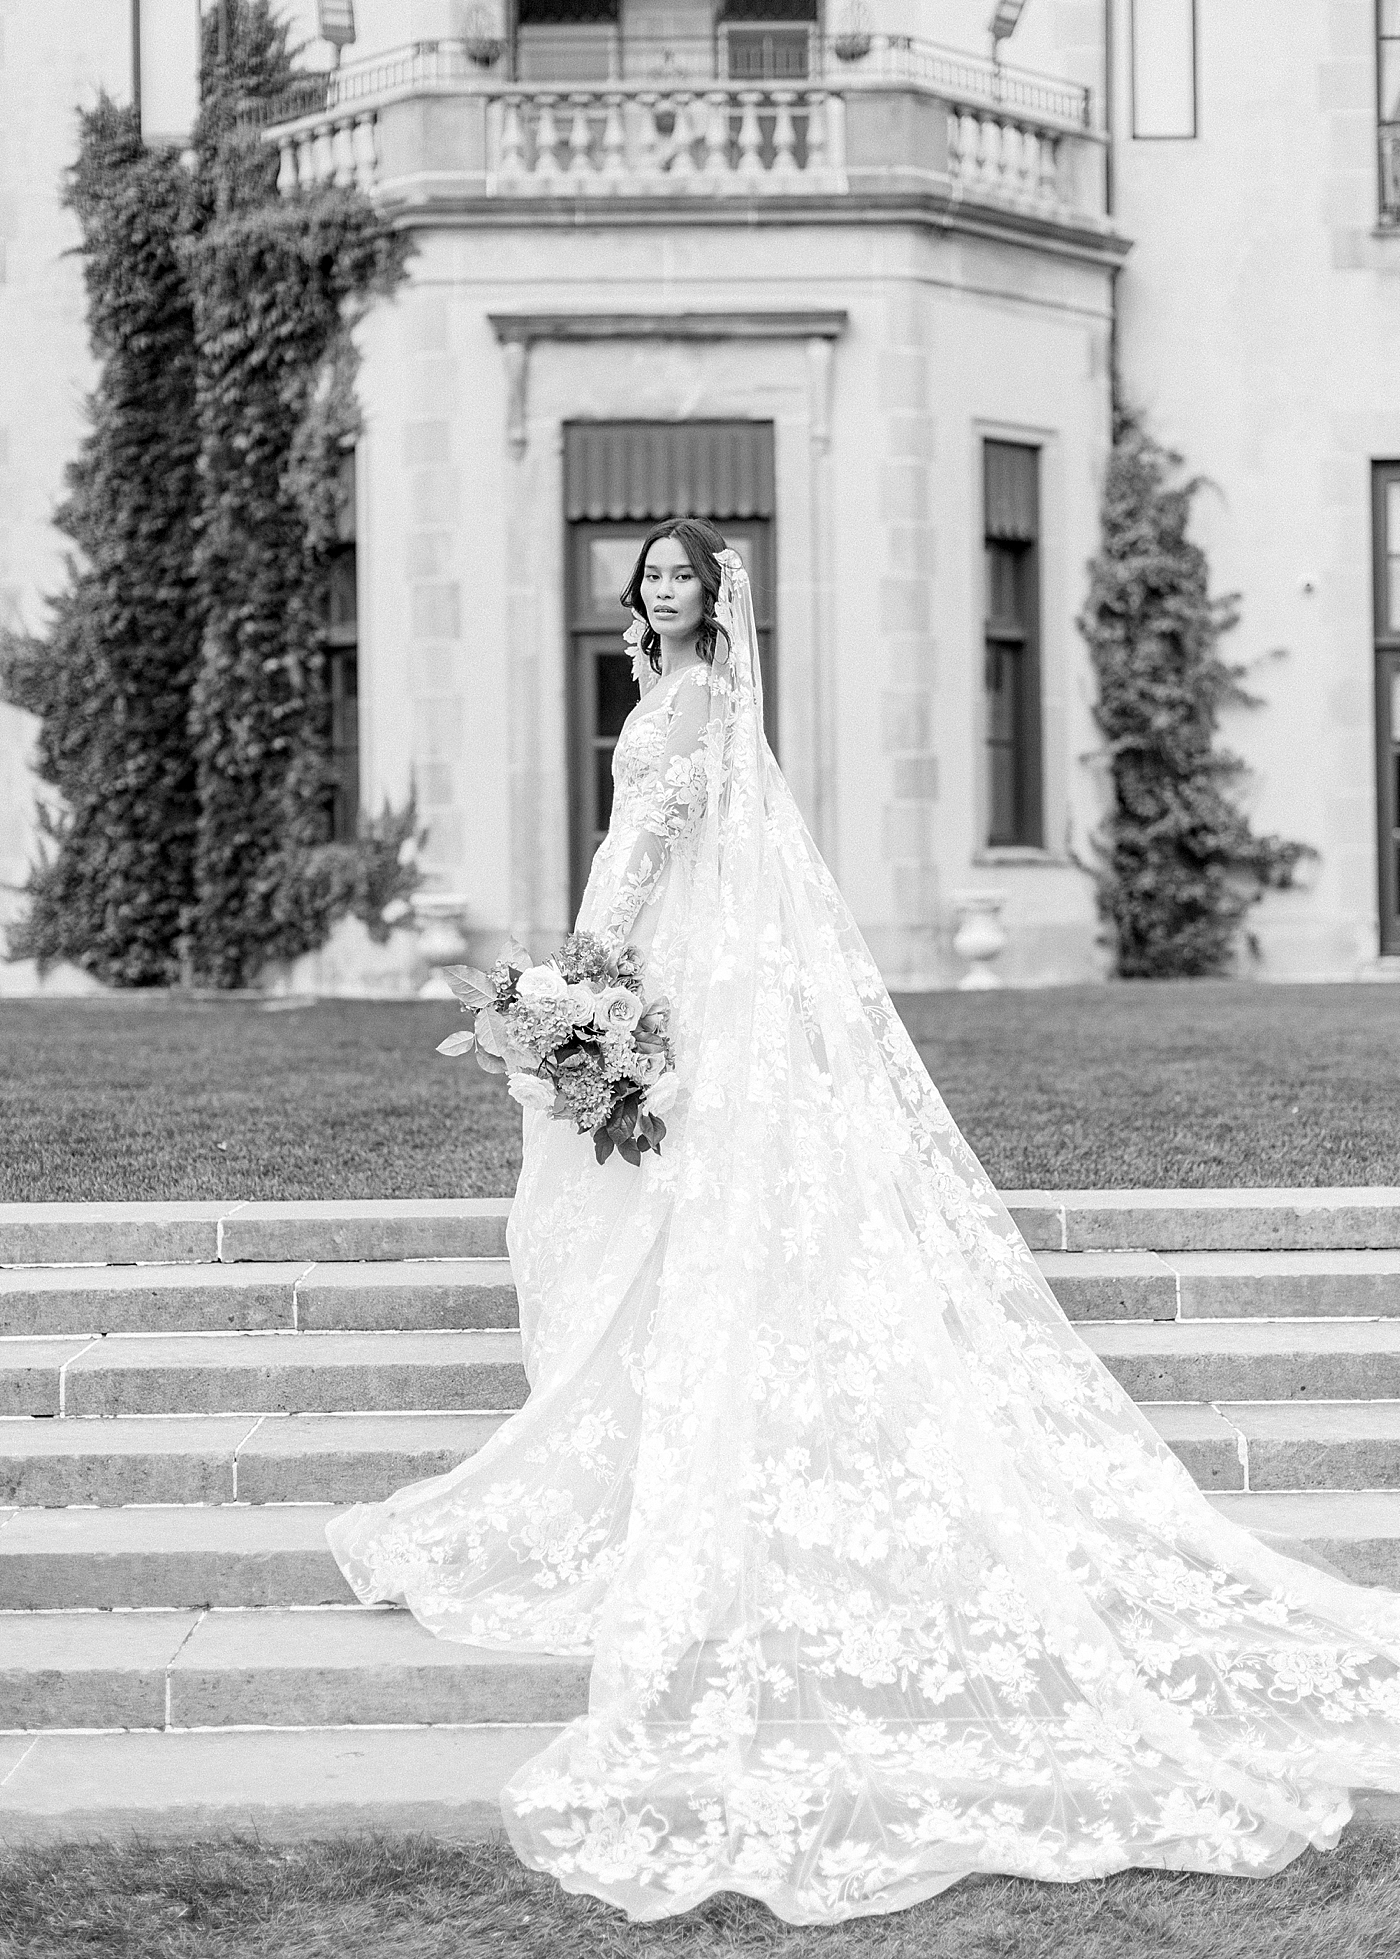 Black and white image of a bride in front of a grand entrance during Oheka castle wedding | Image by Hope Helmuth Photography